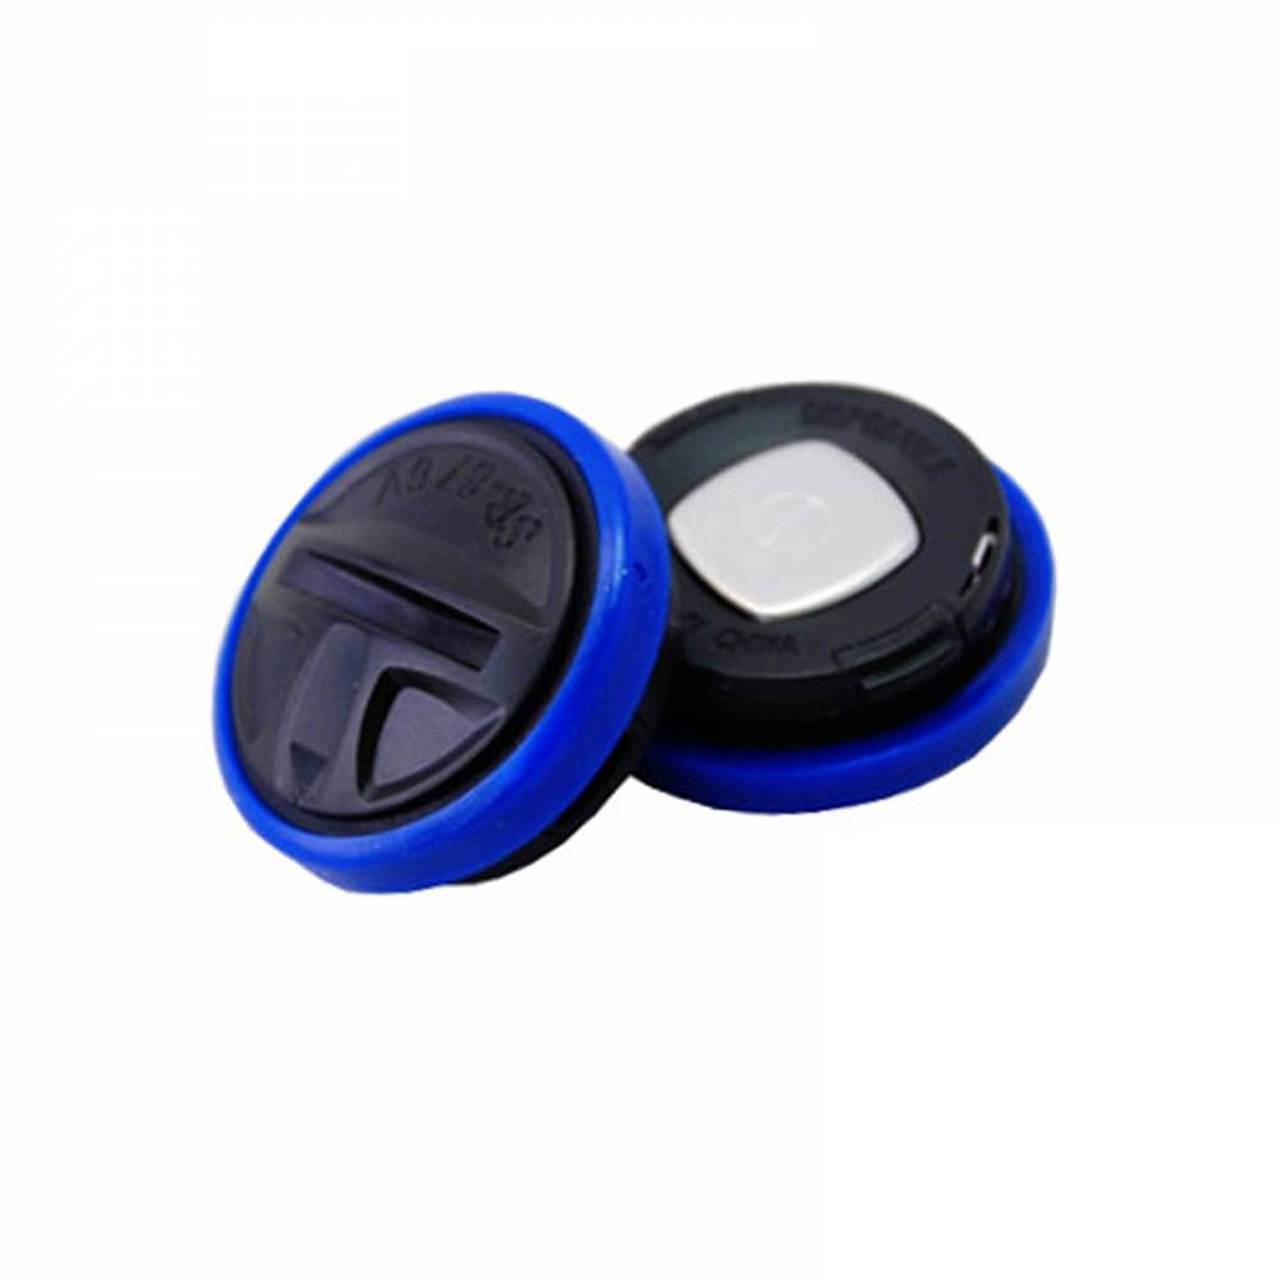 Pet Safe Pet Collar 6V Lithium Battery 67 - 2 Pack On Retail Card + Free Shipping